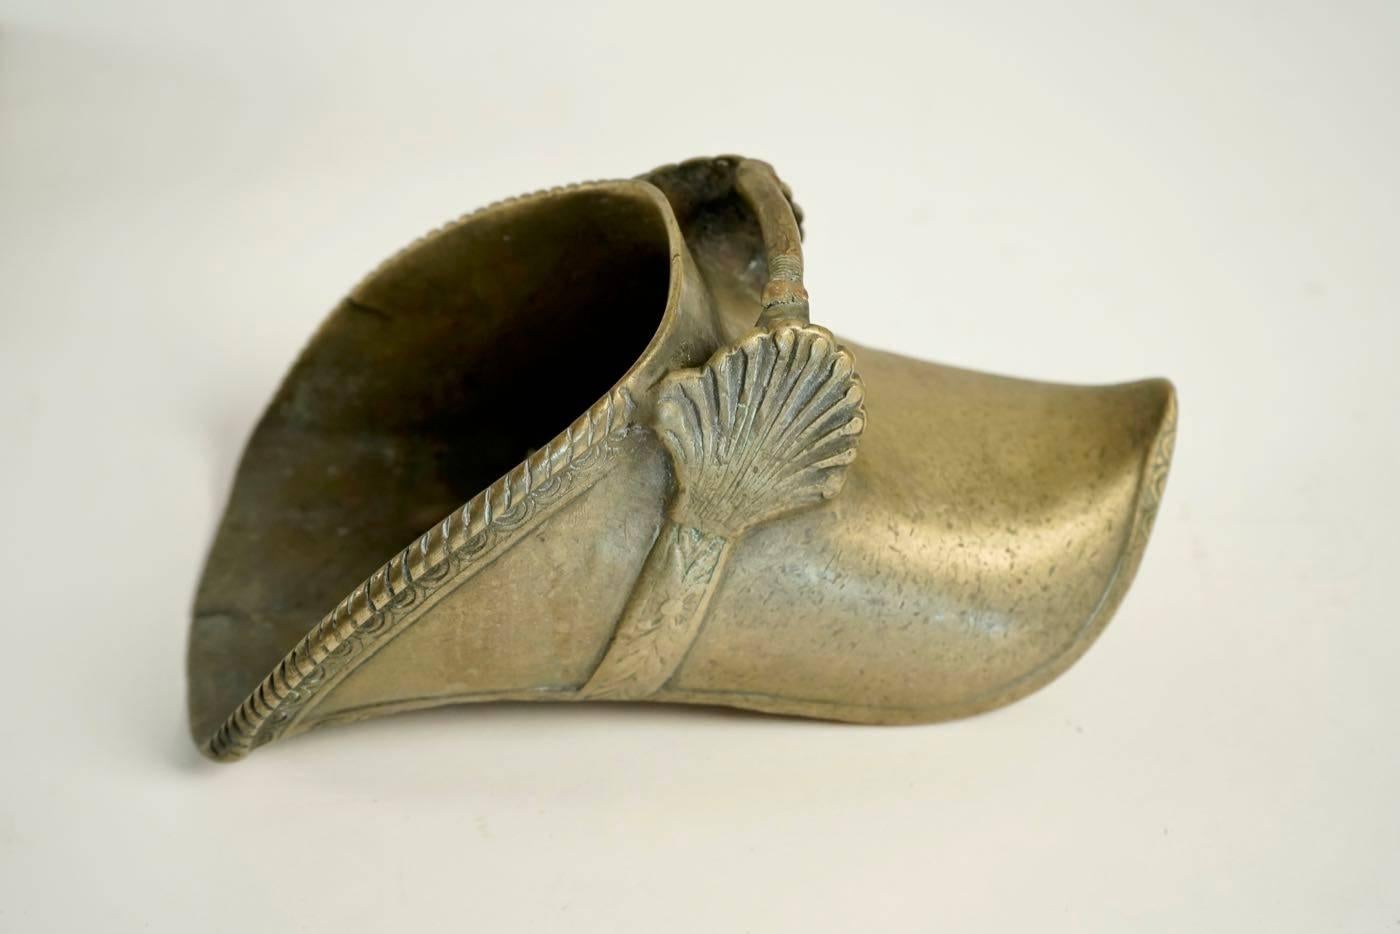 European Two Dutch Shoes from the 17th Century in Bronze